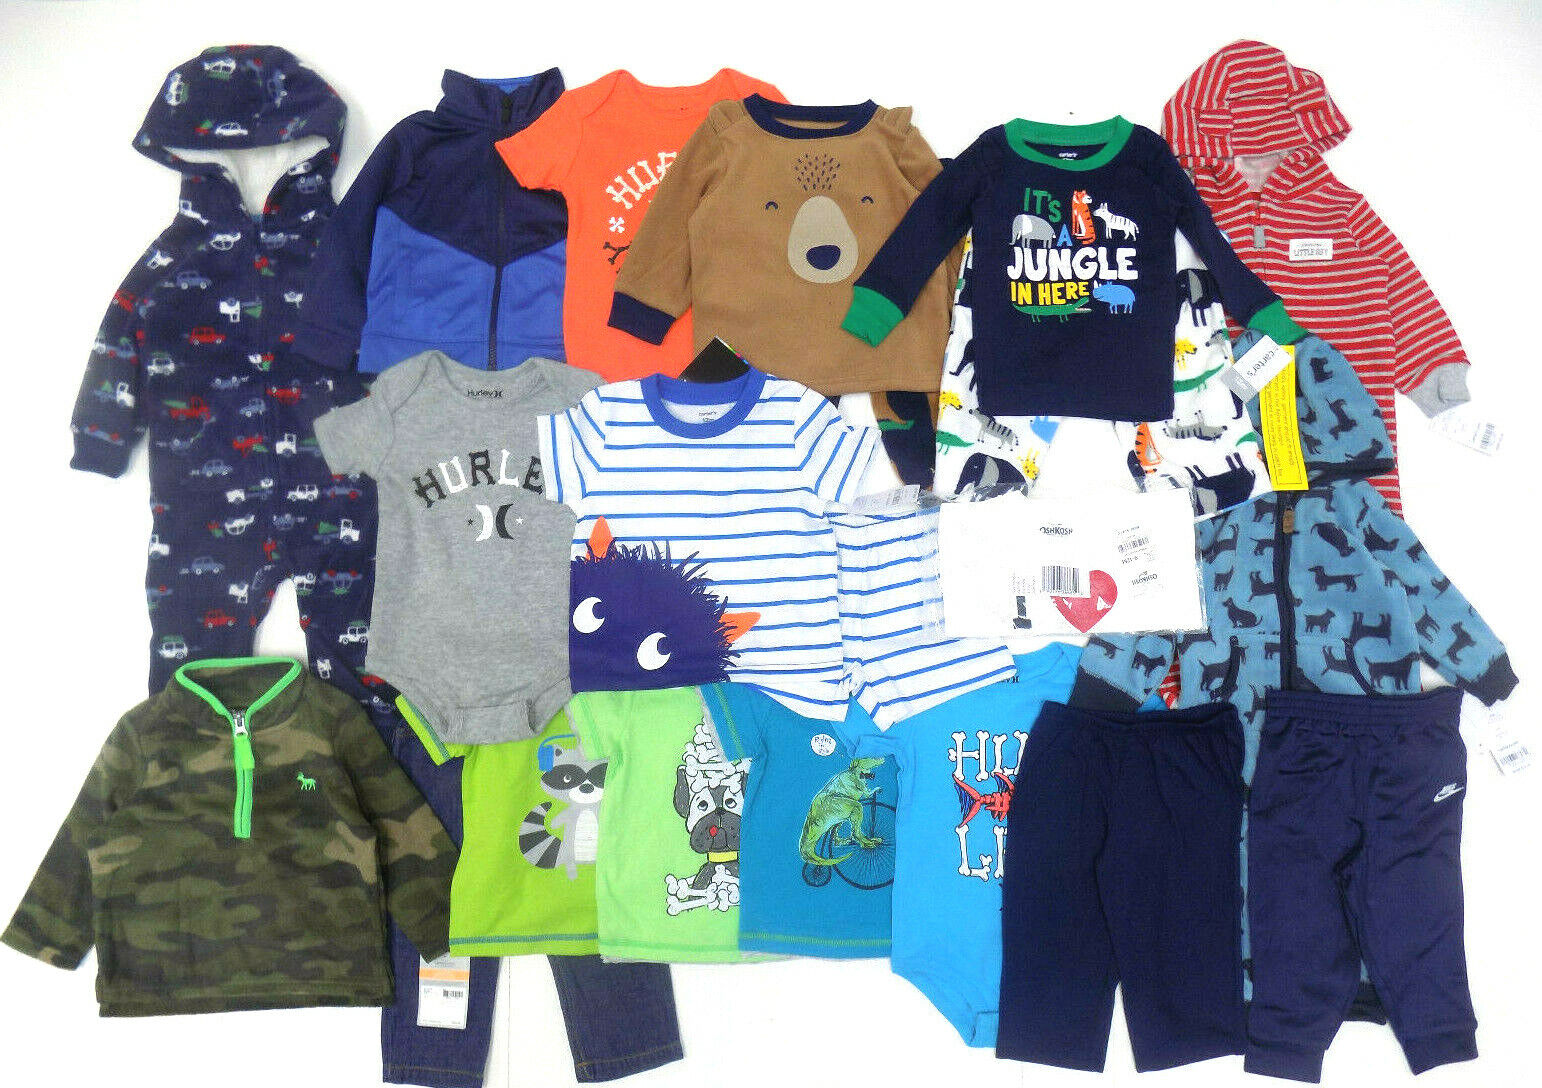 Nike Carters Baby Boys 21 Piece Clothing Set - 9/12 Months - New with tags! Carter's/Hurley/NIKE/OshKosh